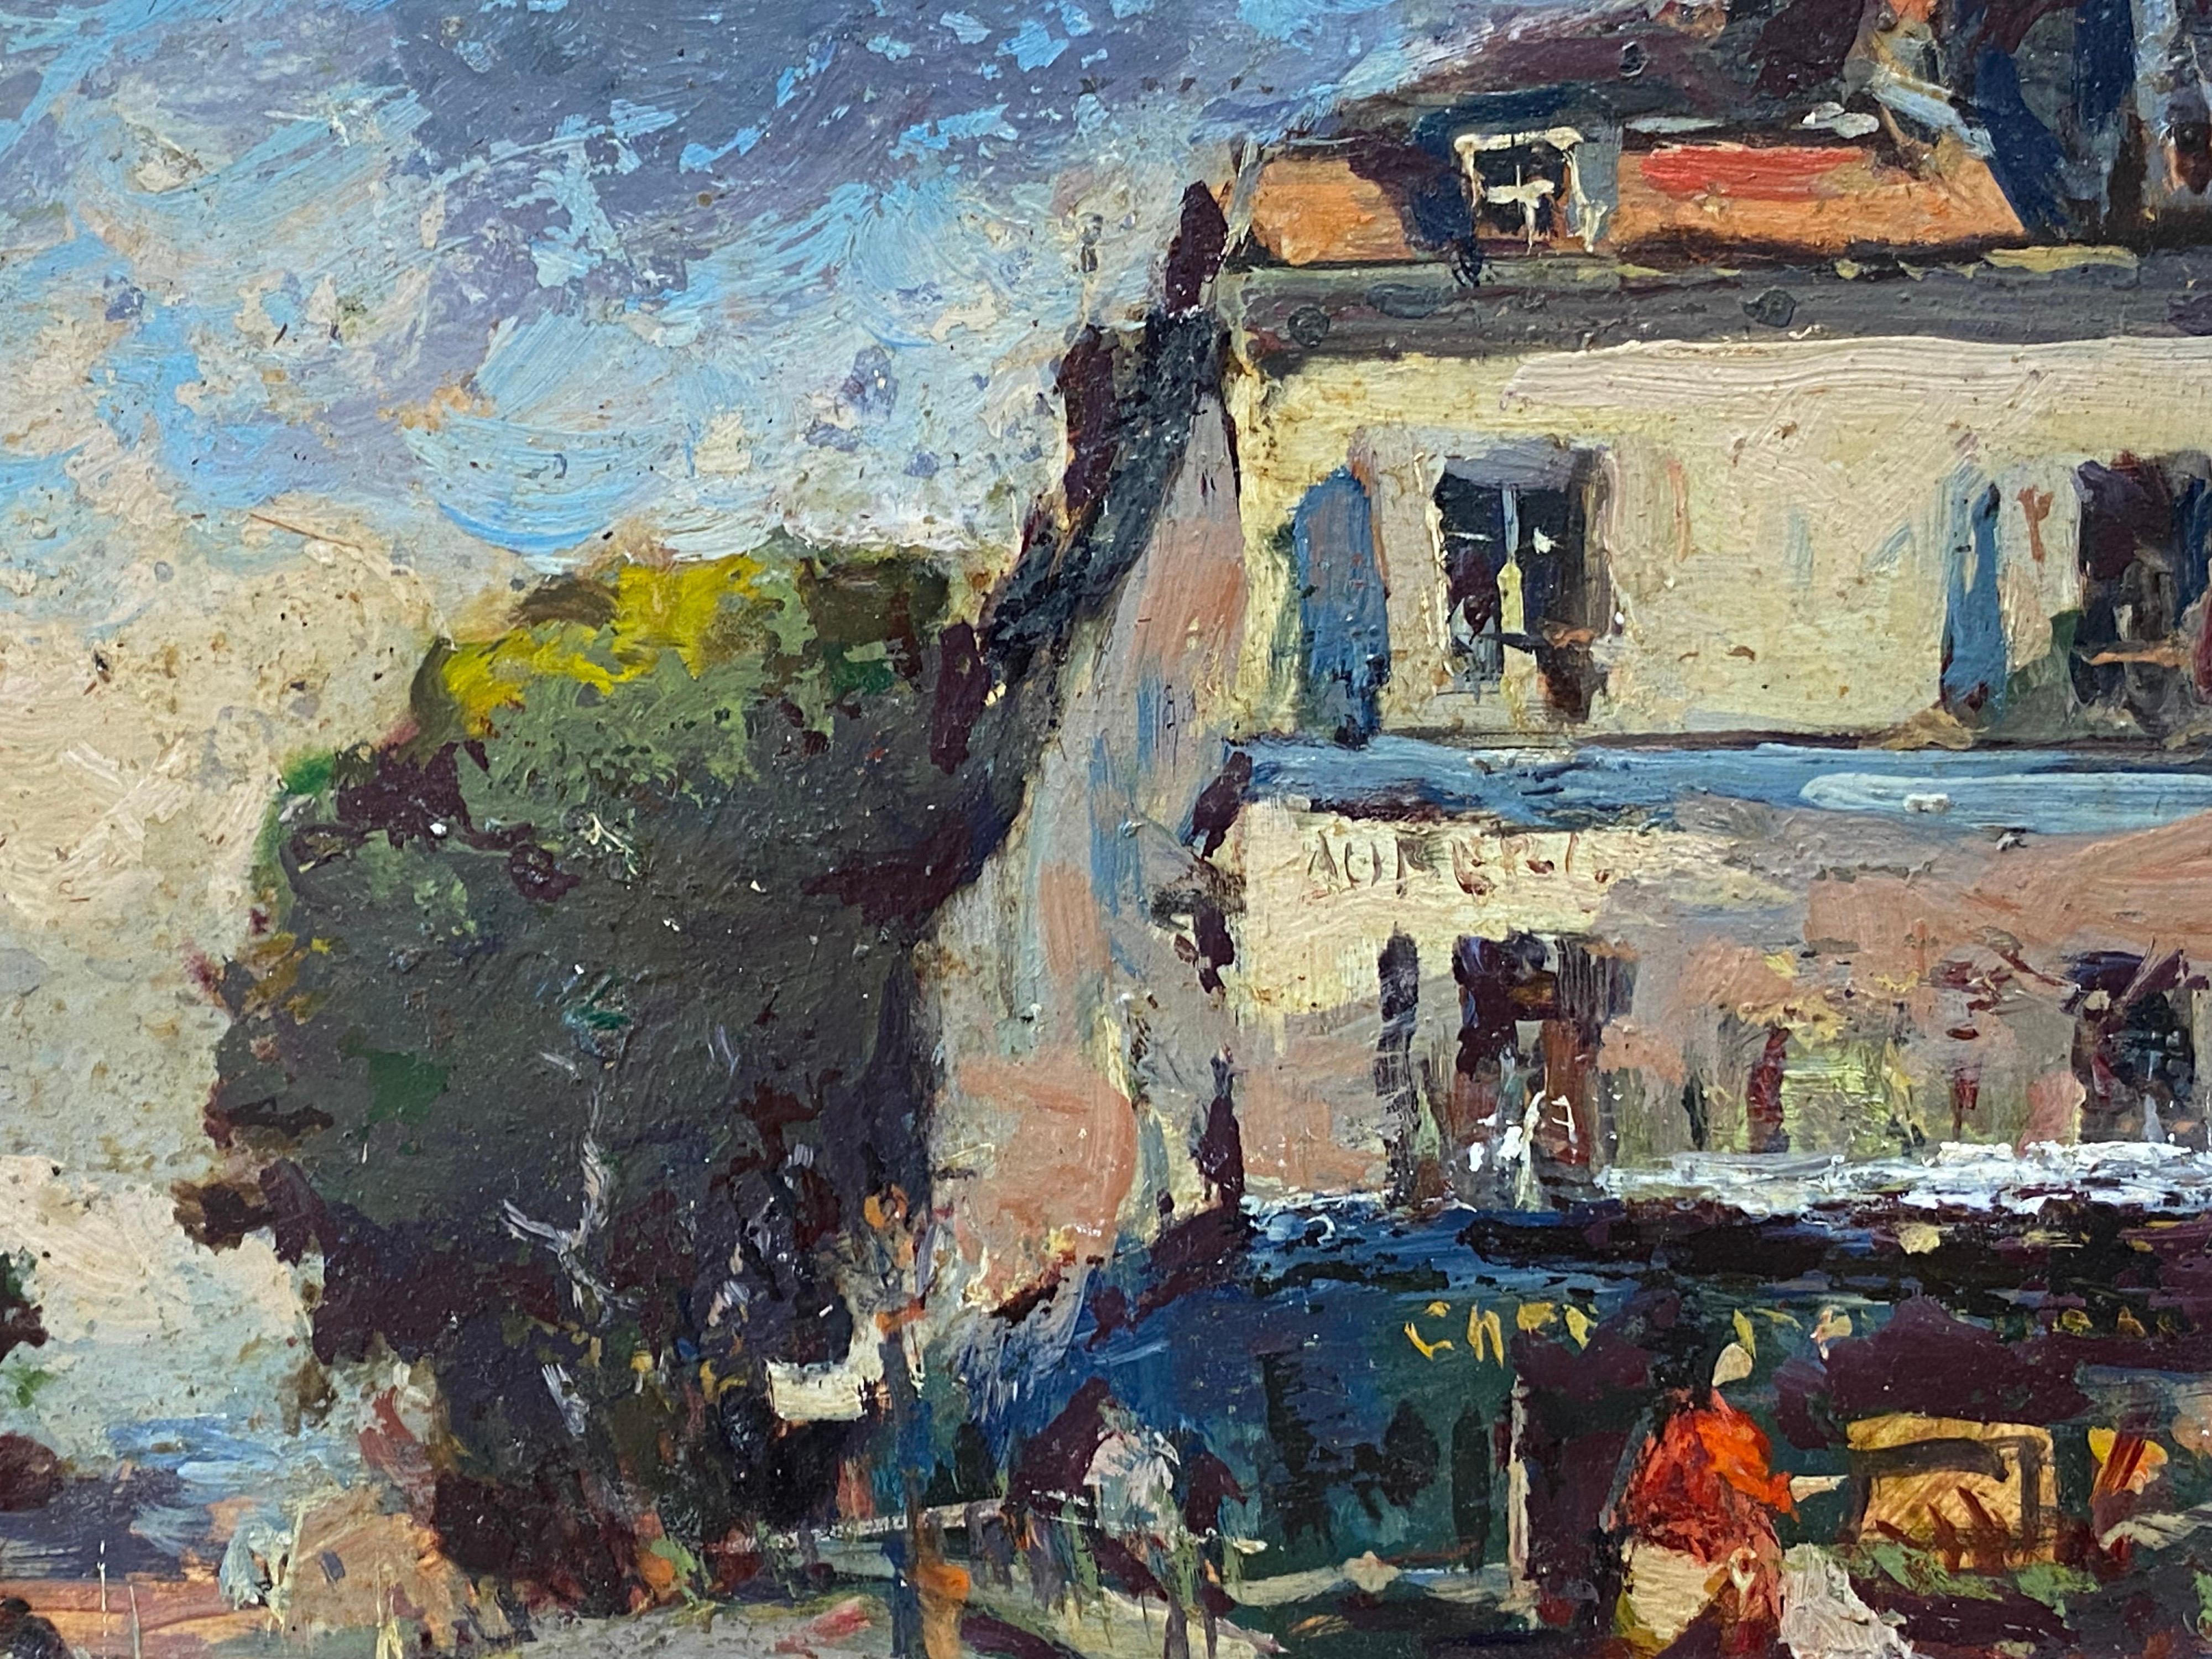 French Impressionist 'en plein air' original painting
by Maurice Mazeilie (French)
oil painting on thin board, unframed
stamped verso

painting: 6.25 x 8.75 inches

A delightful original oil painting by the 20th century French Impressionist